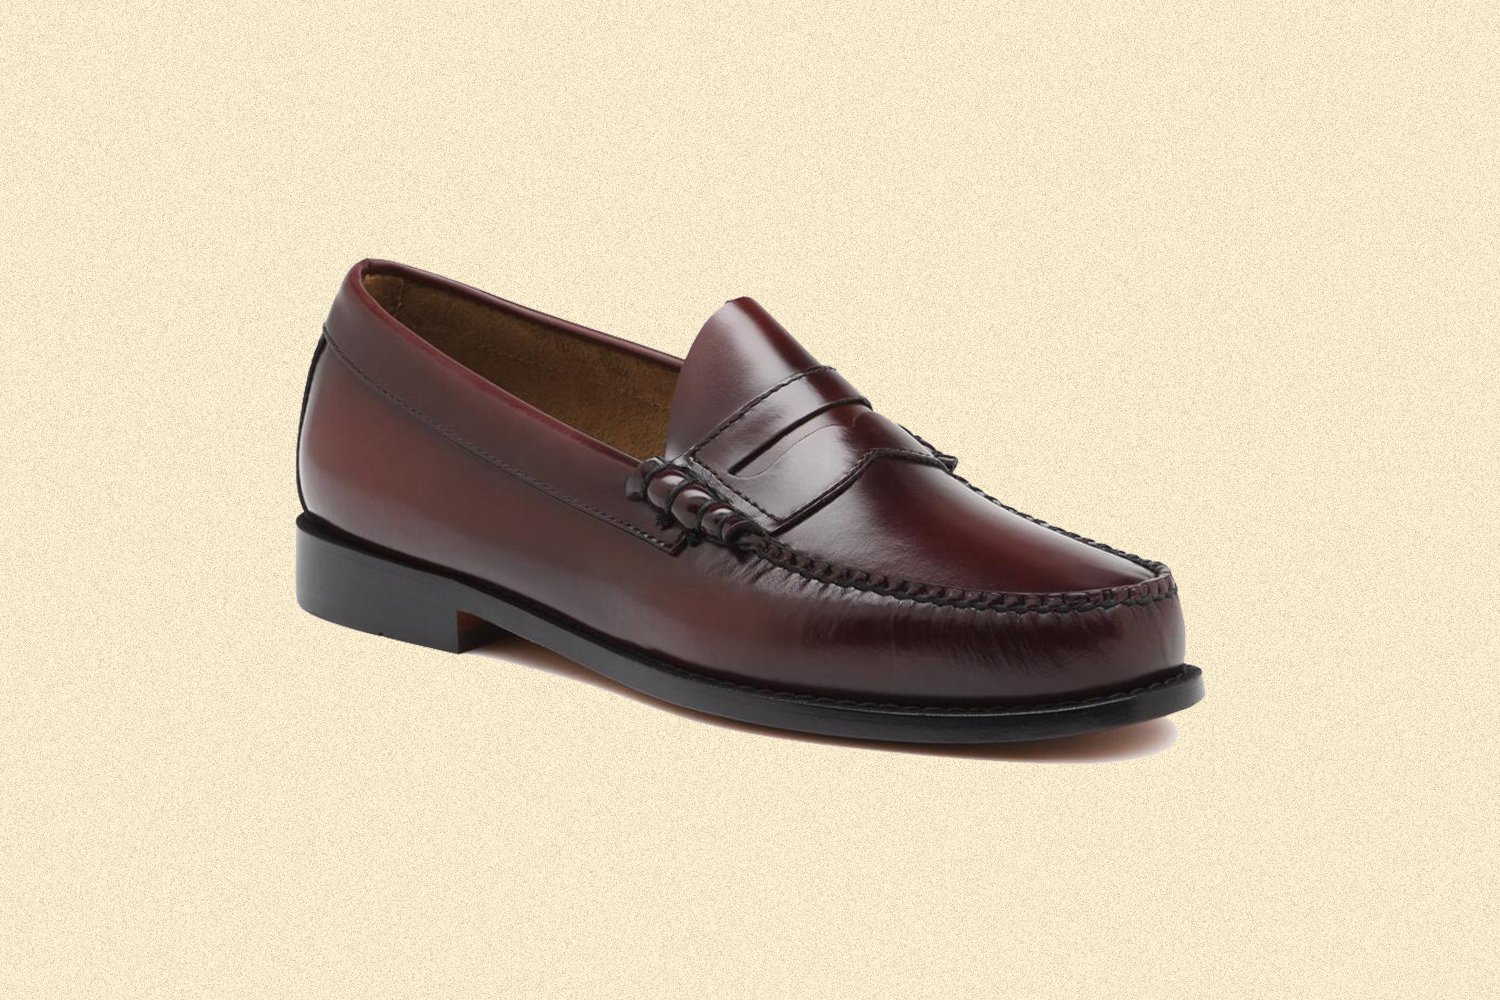 Shop Men's Loafers During the G.H. Bass Labor Day Sale InsideHook